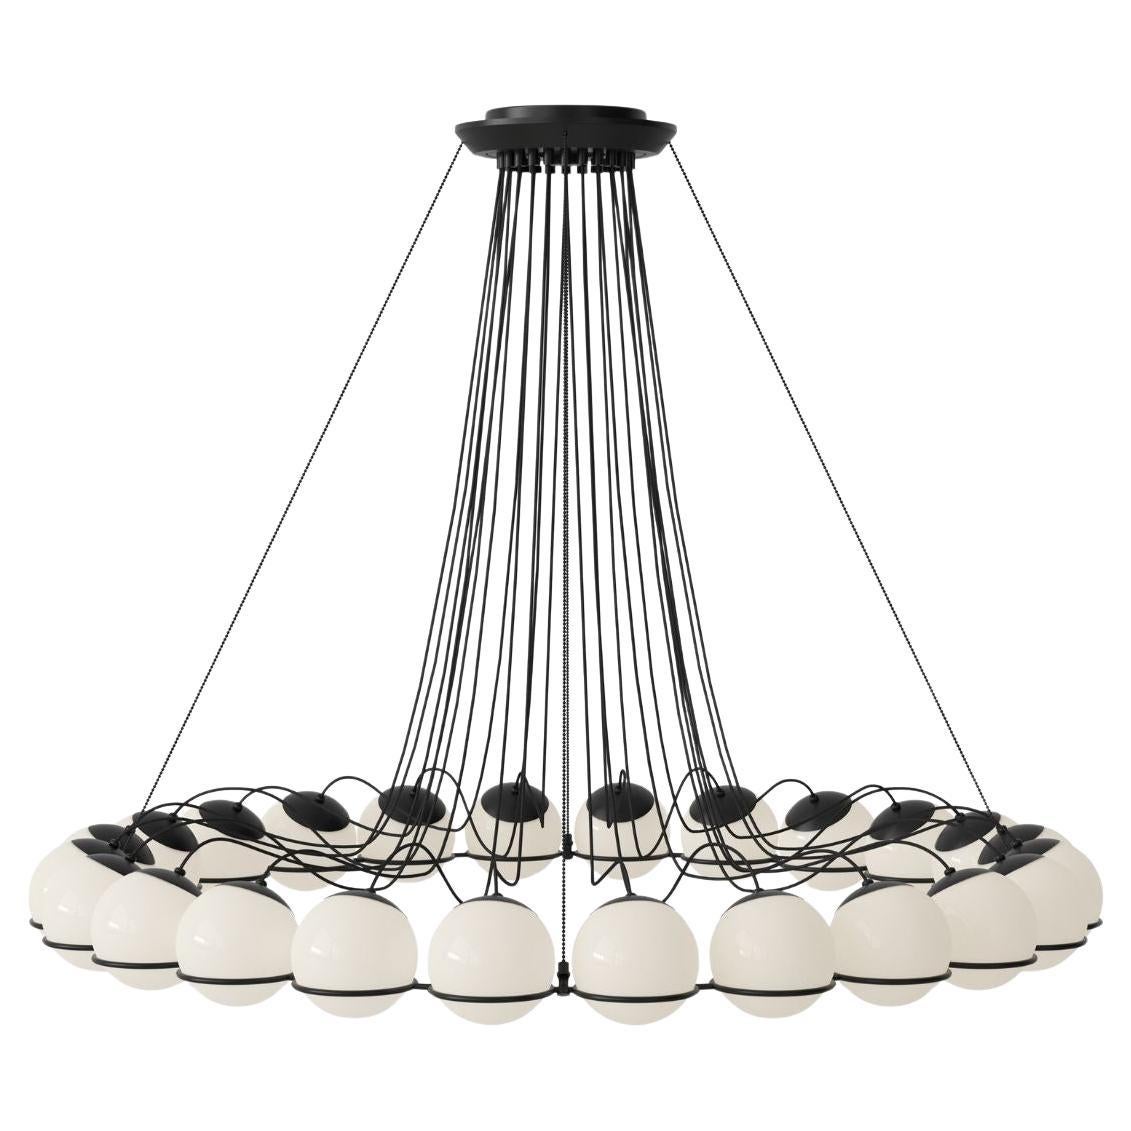 Monumental Gino Sarfatti Model 2109/24/14 Chandelier in Black for Astep For Sale